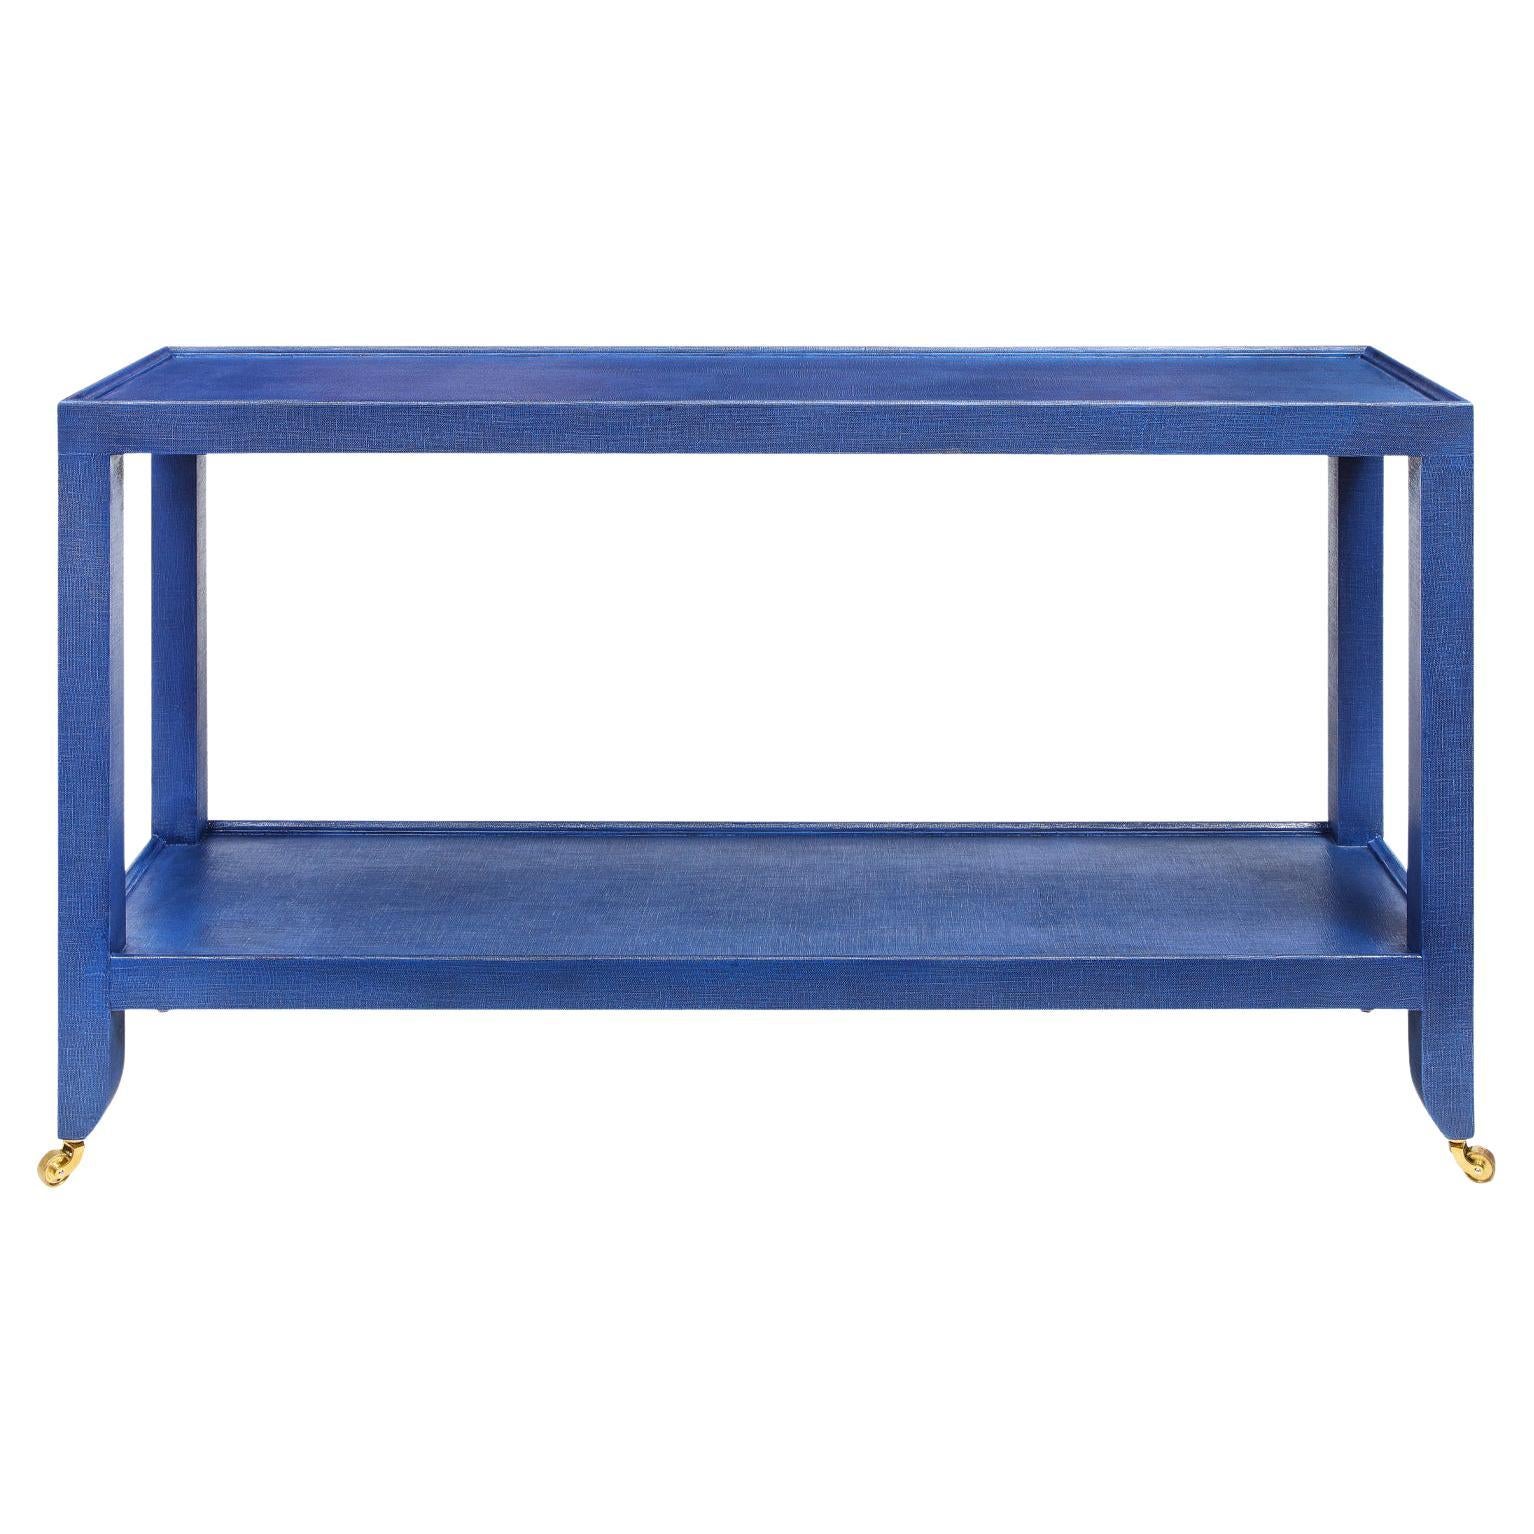 Karl Springer Duchess Console in Blue Lacquered Linen 1990s 'Signed'